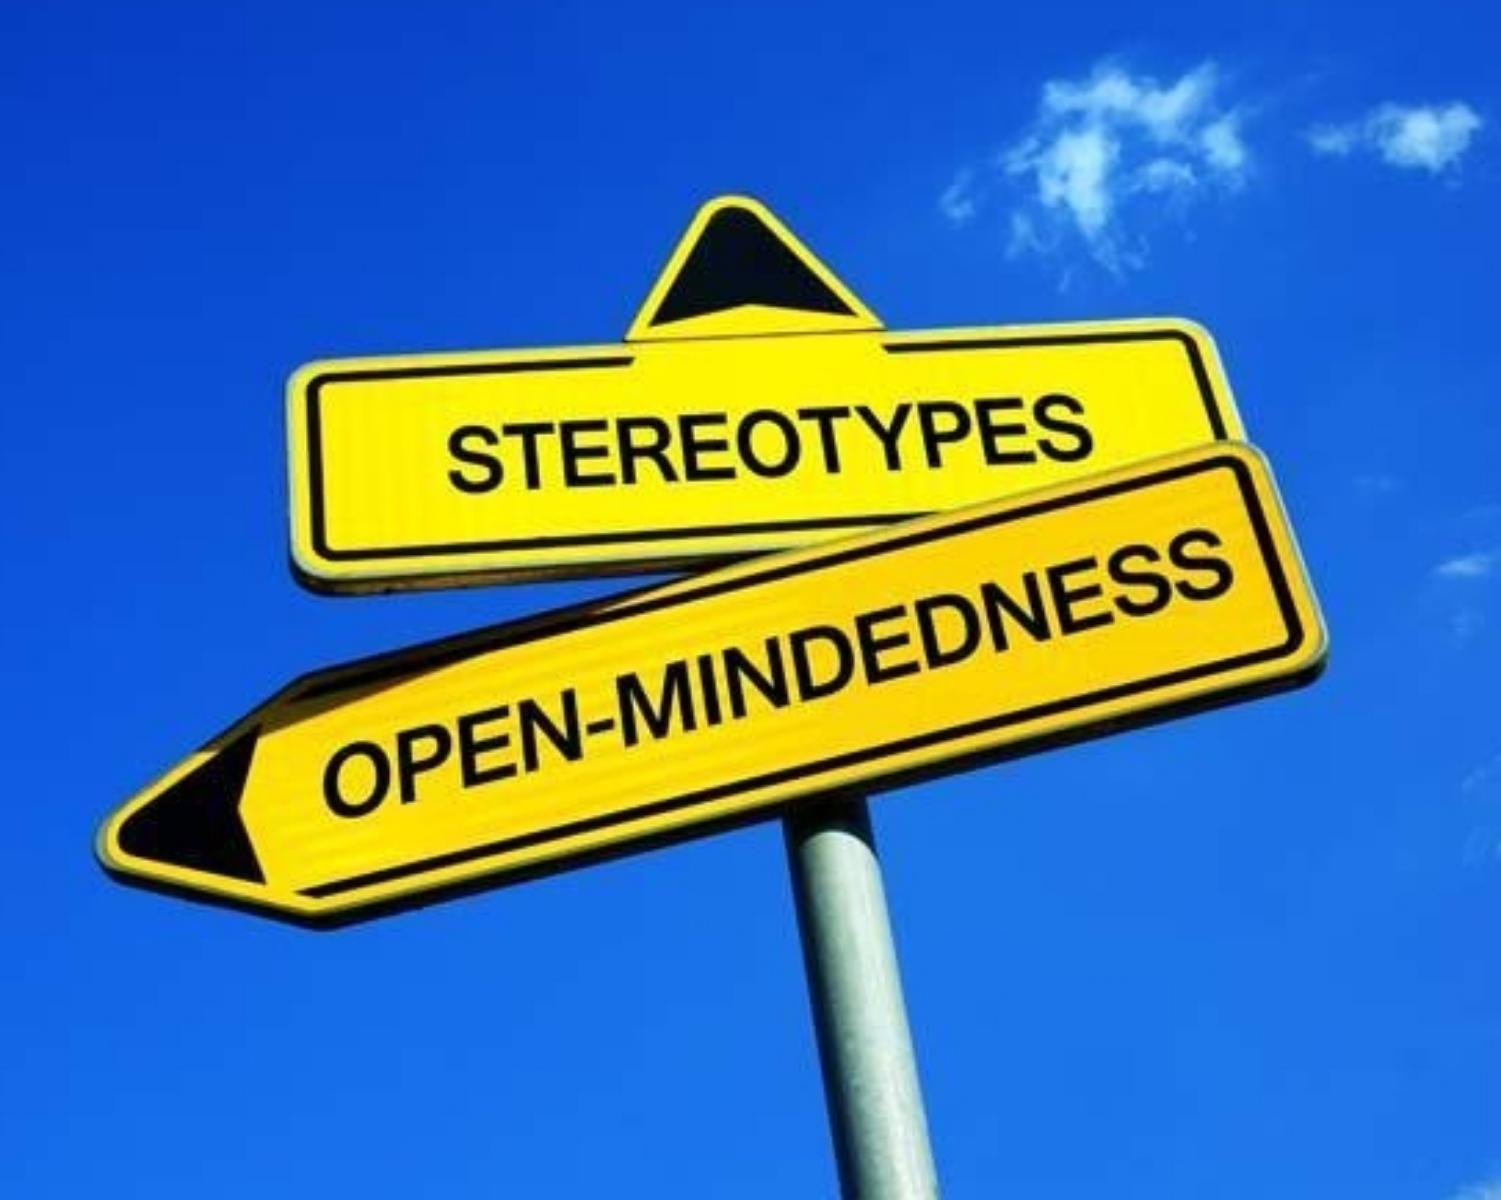 Snap judgments based on stereotypes muddle our thinking.